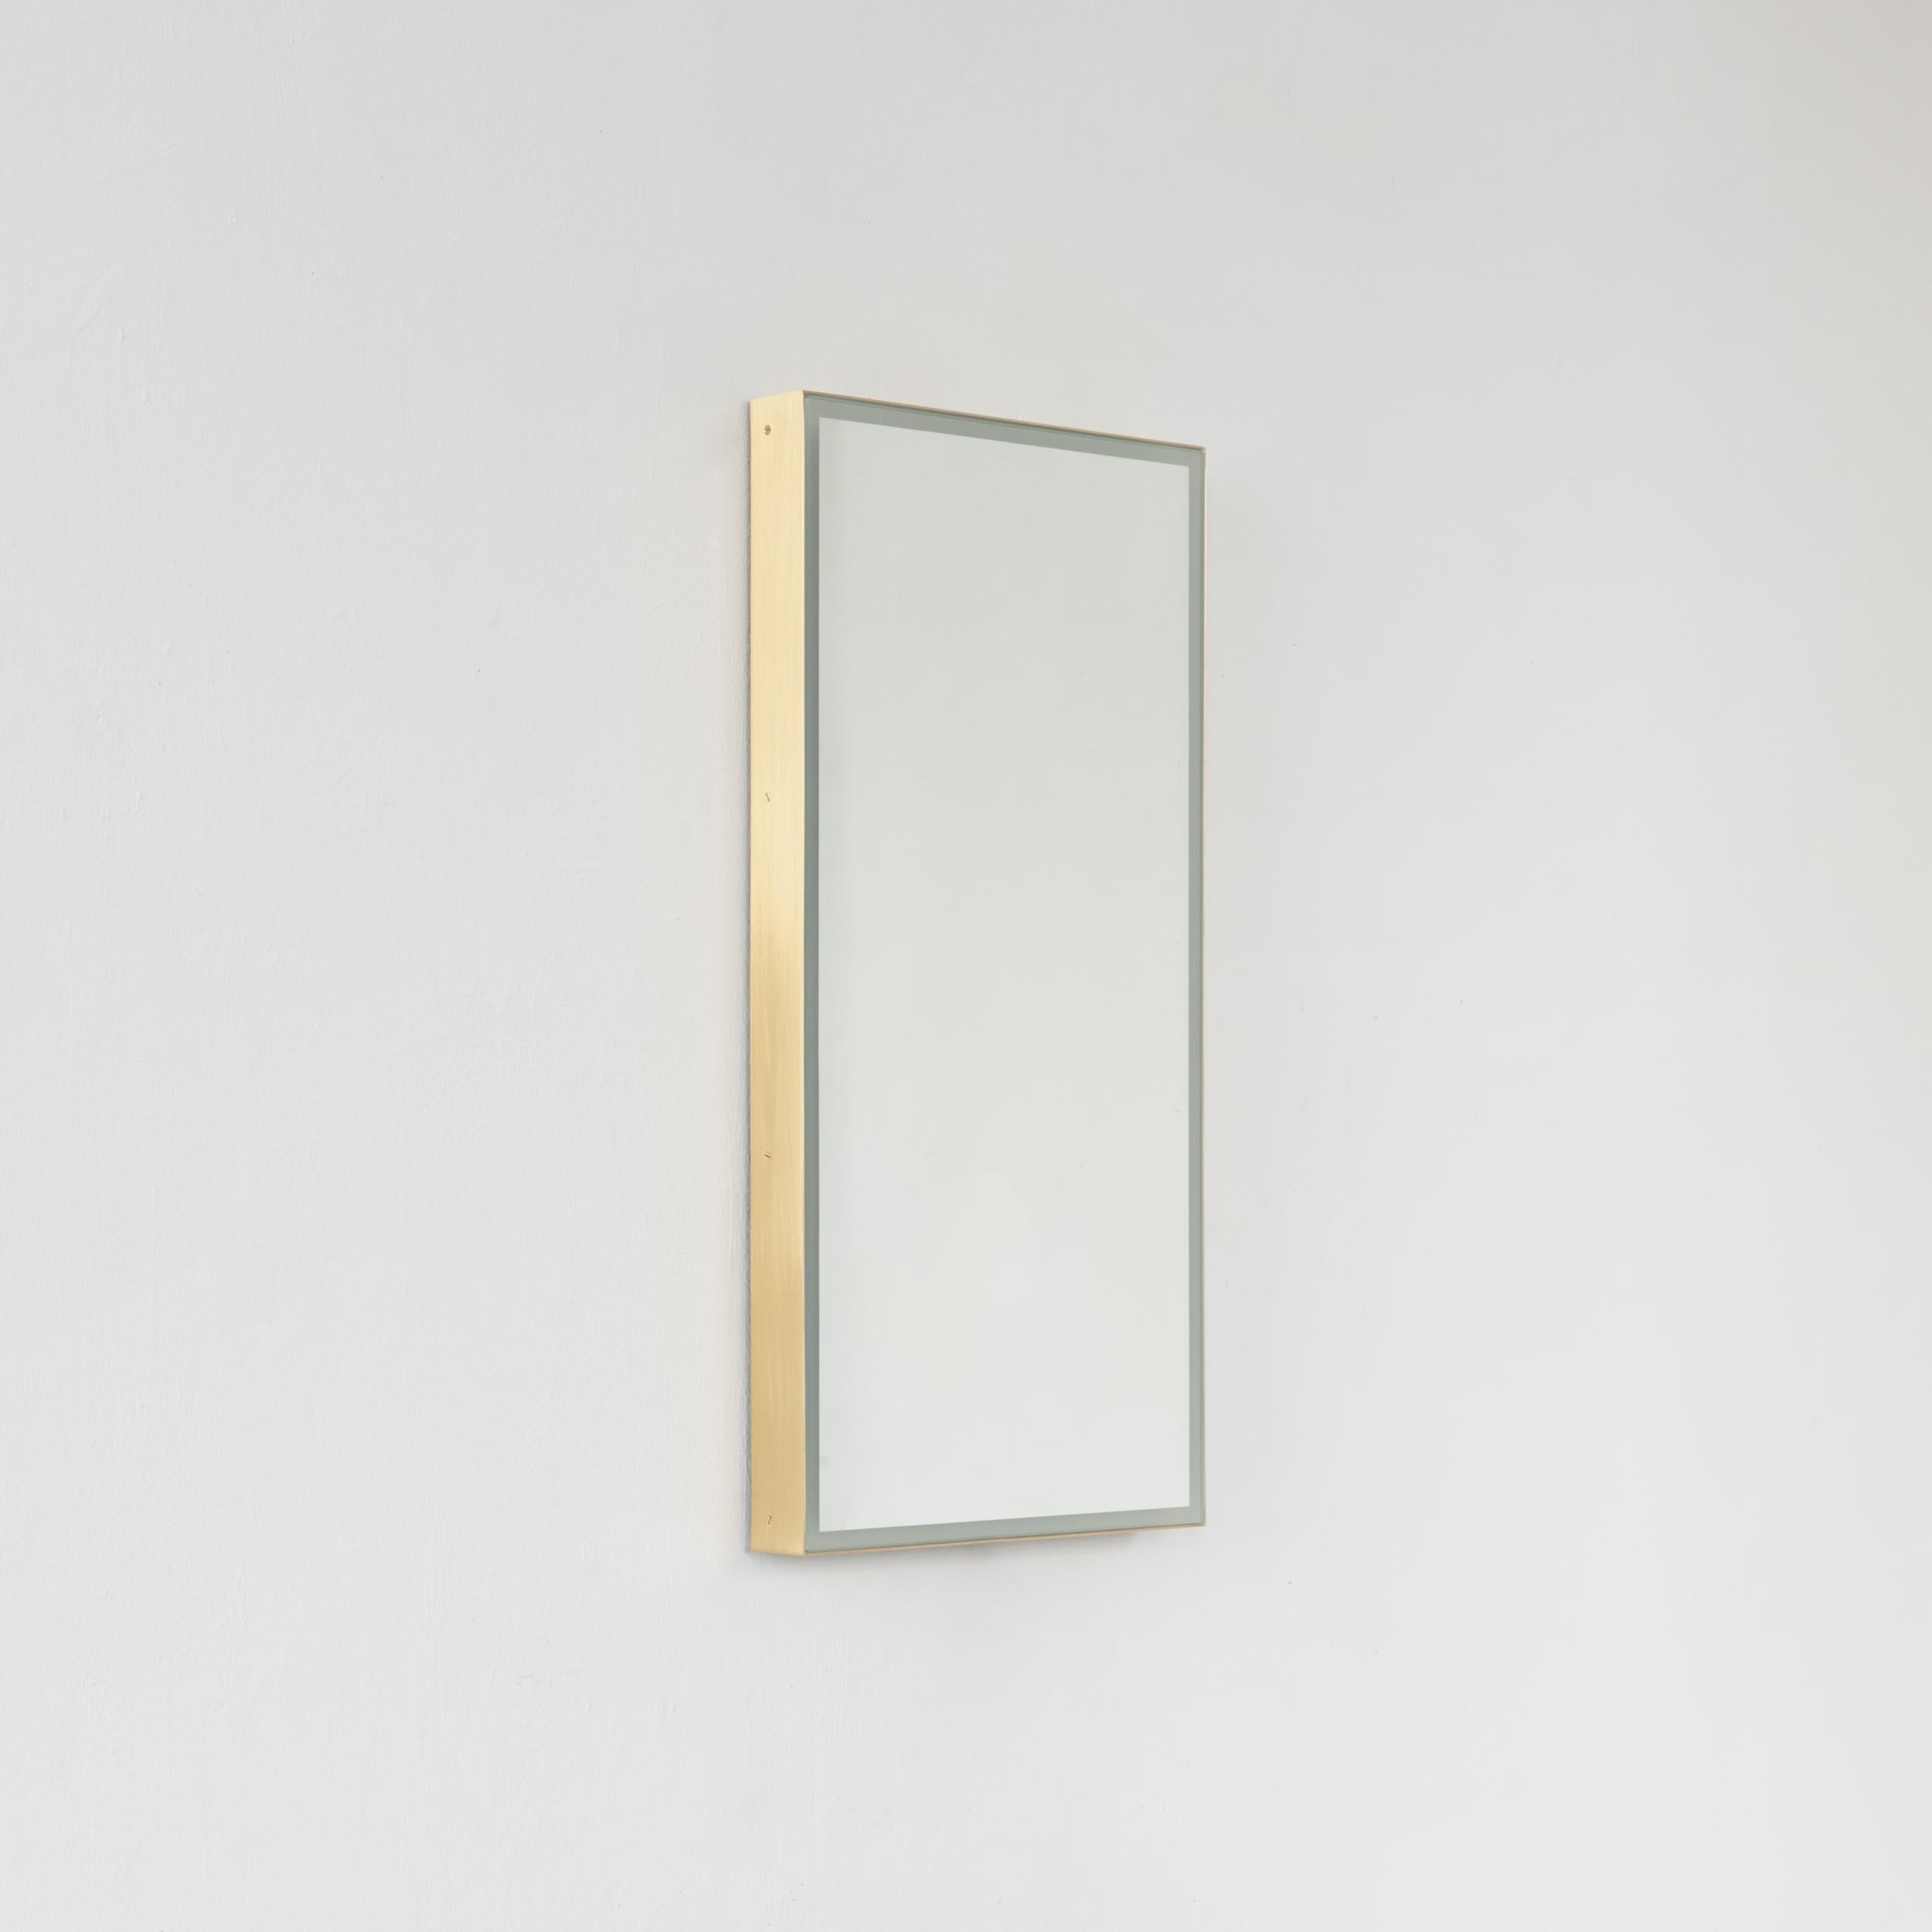 Brushed Quadris Rectangular Front Illuminated Modern Mirror with Brass Frame, Large For Sale